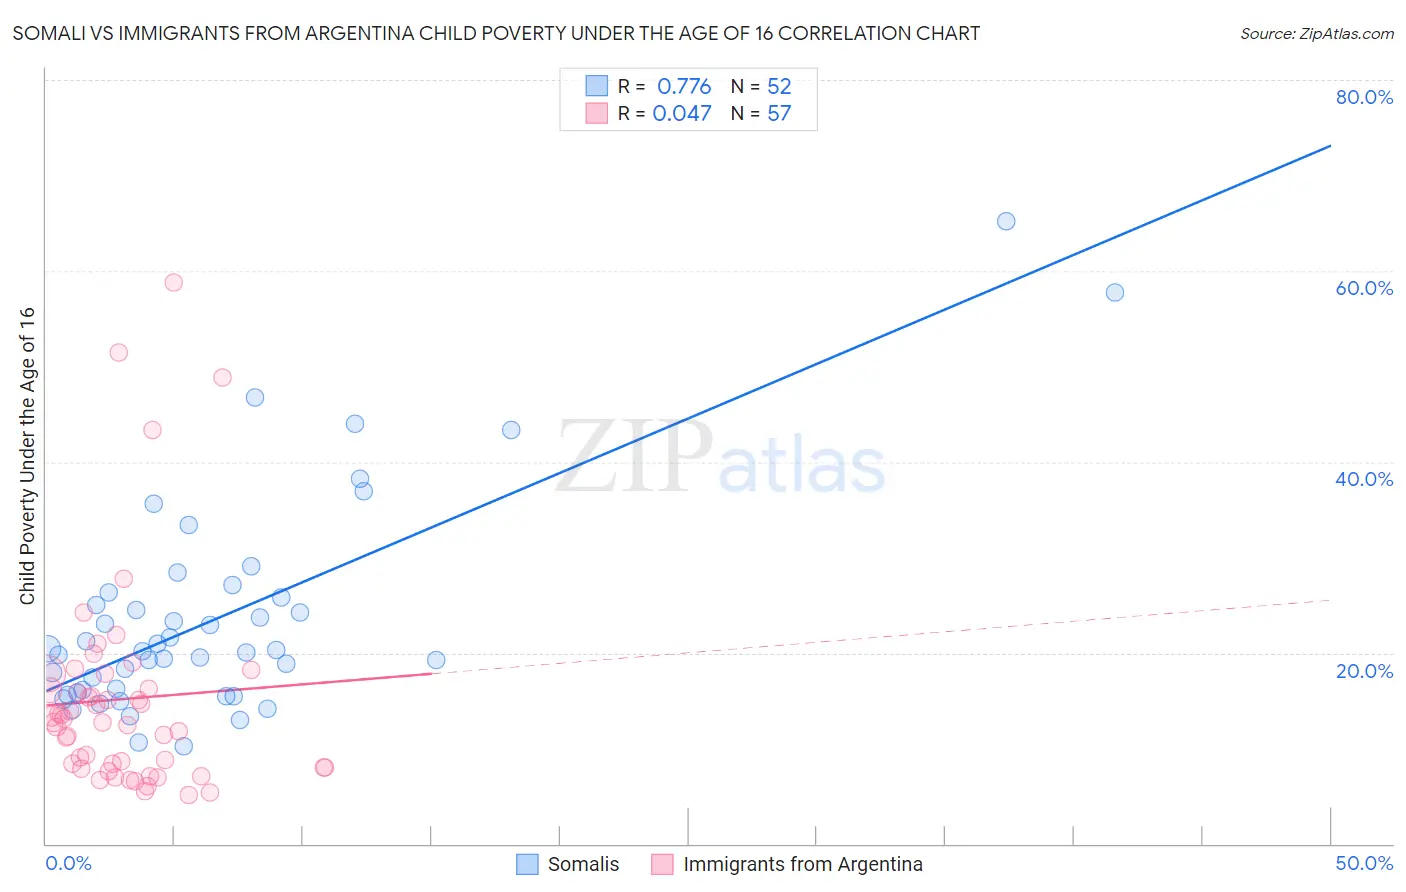 Somali vs Immigrants from Argentina Child Poverty Under the Age of 16